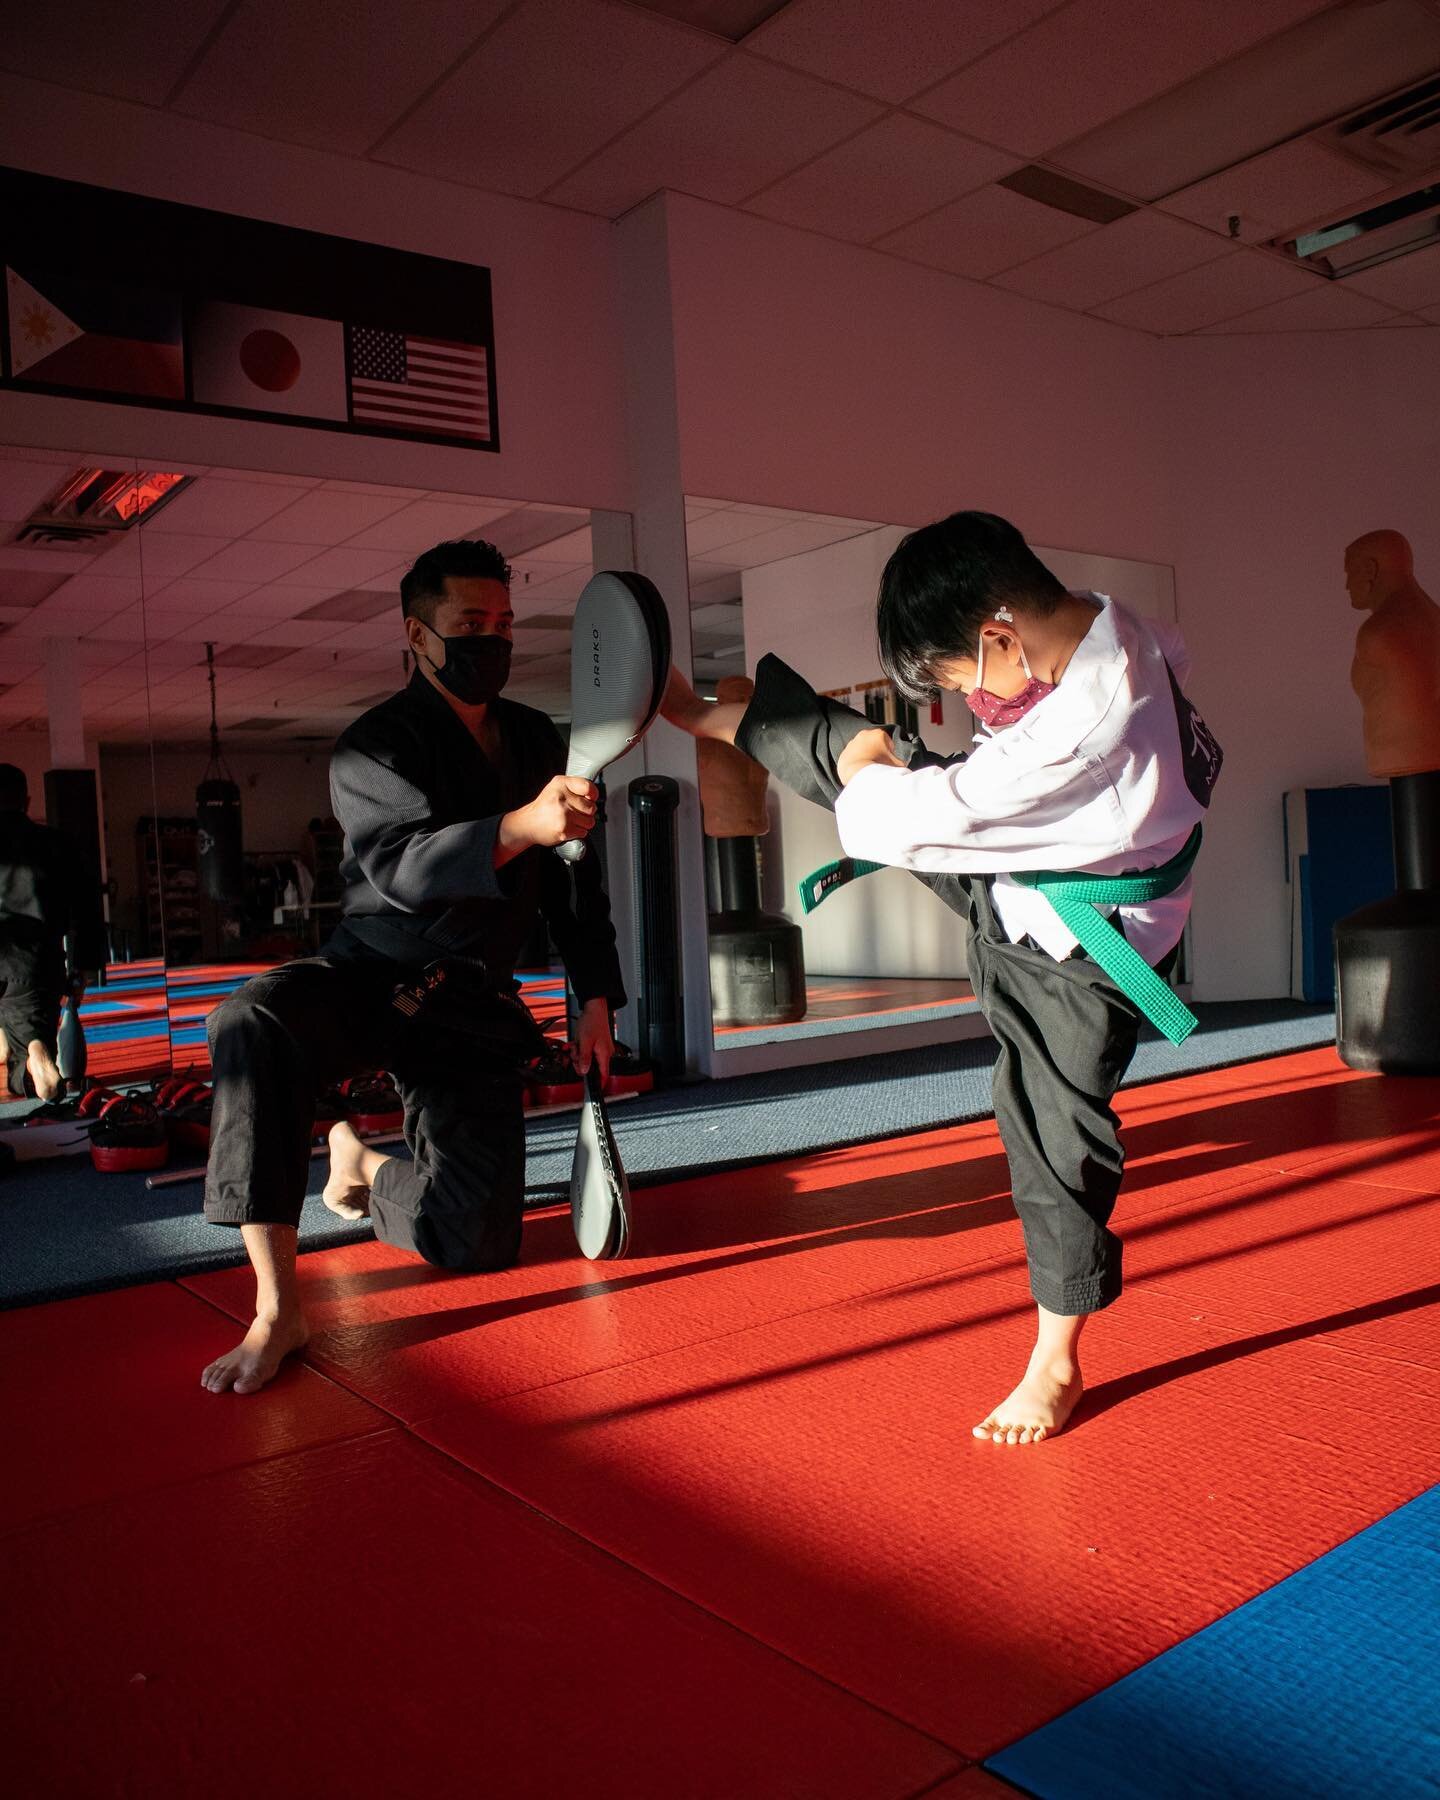 Give your child skills that will last a lifetime 🎁⠀
⠀
Our children&rsquo;s program teaches self-defense, discipline, respect, focus, integrity and confidence. TMD is a place of community, where kids can gain martial arts knowledge, practical skills,